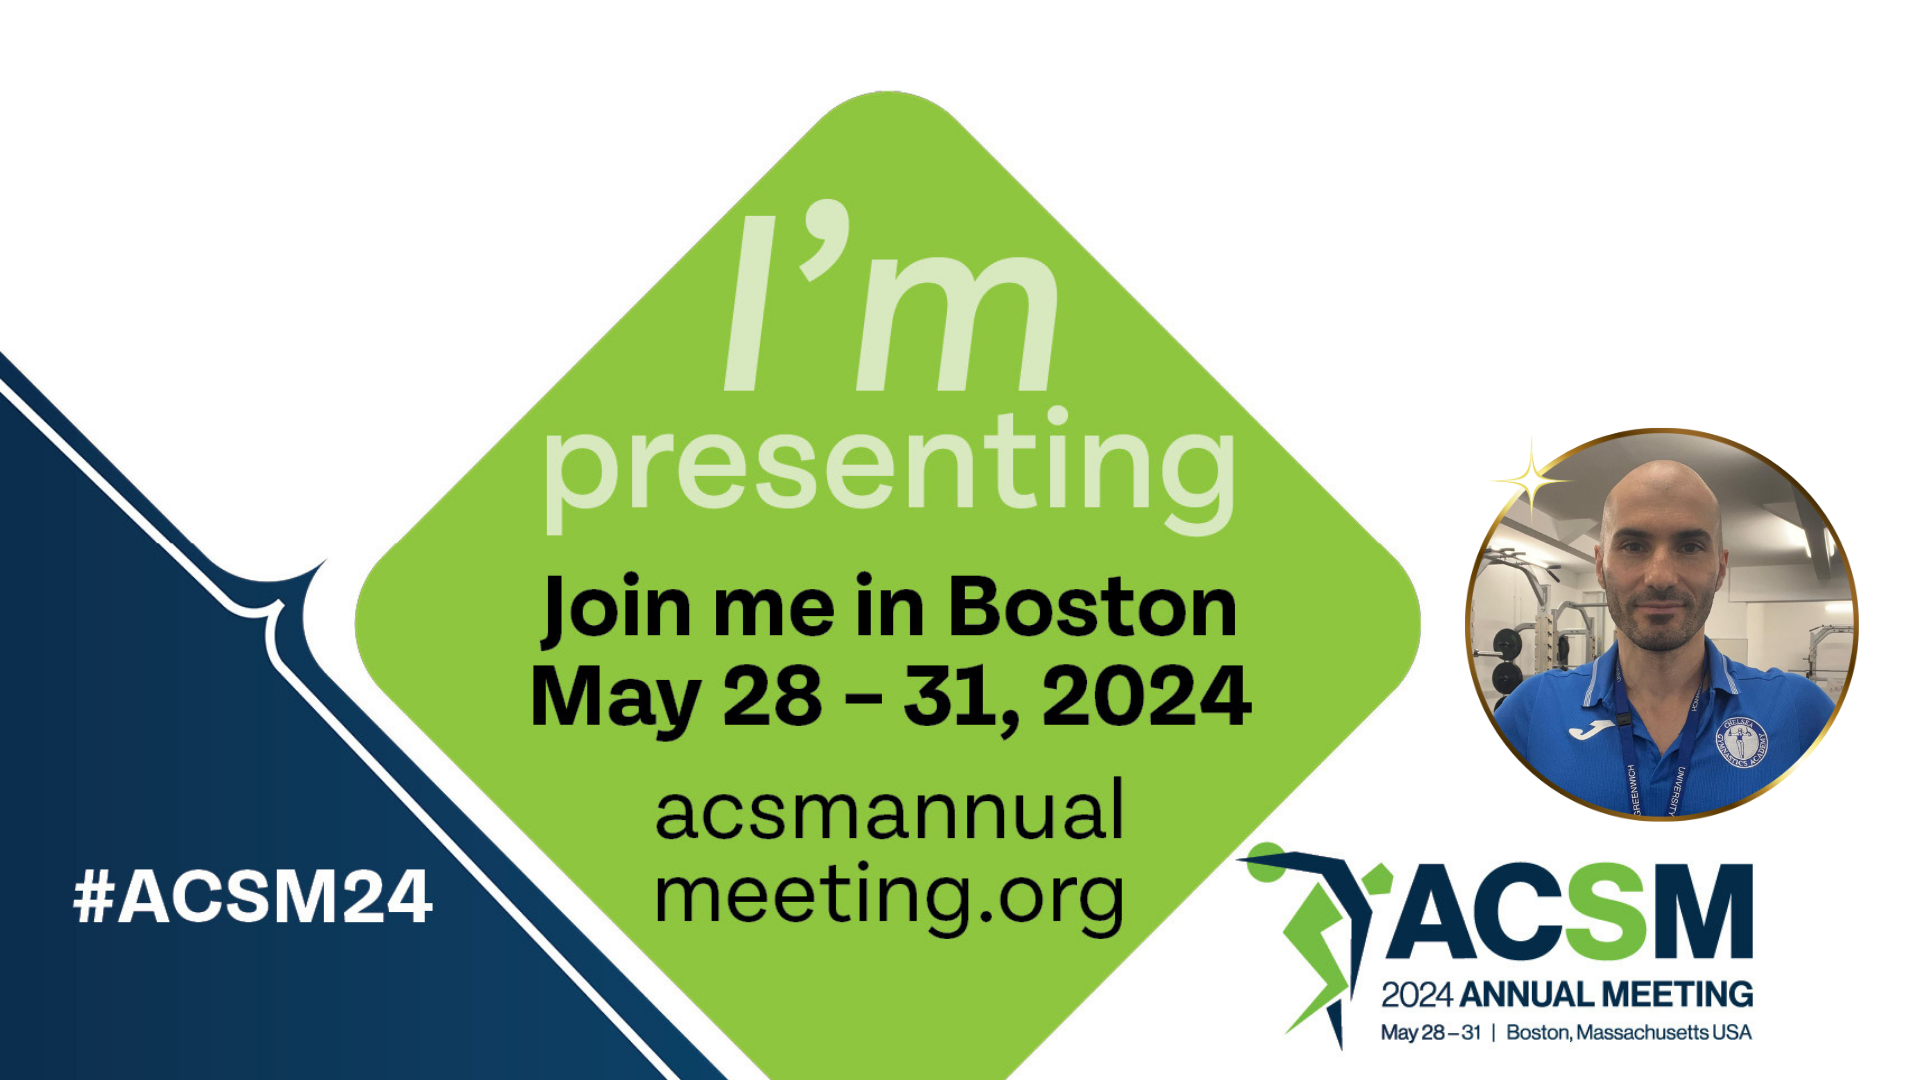 Stefan Kolimechkov PhD is presenting research at the 2024 Annual Meeting of the ACSM in Boston, USA